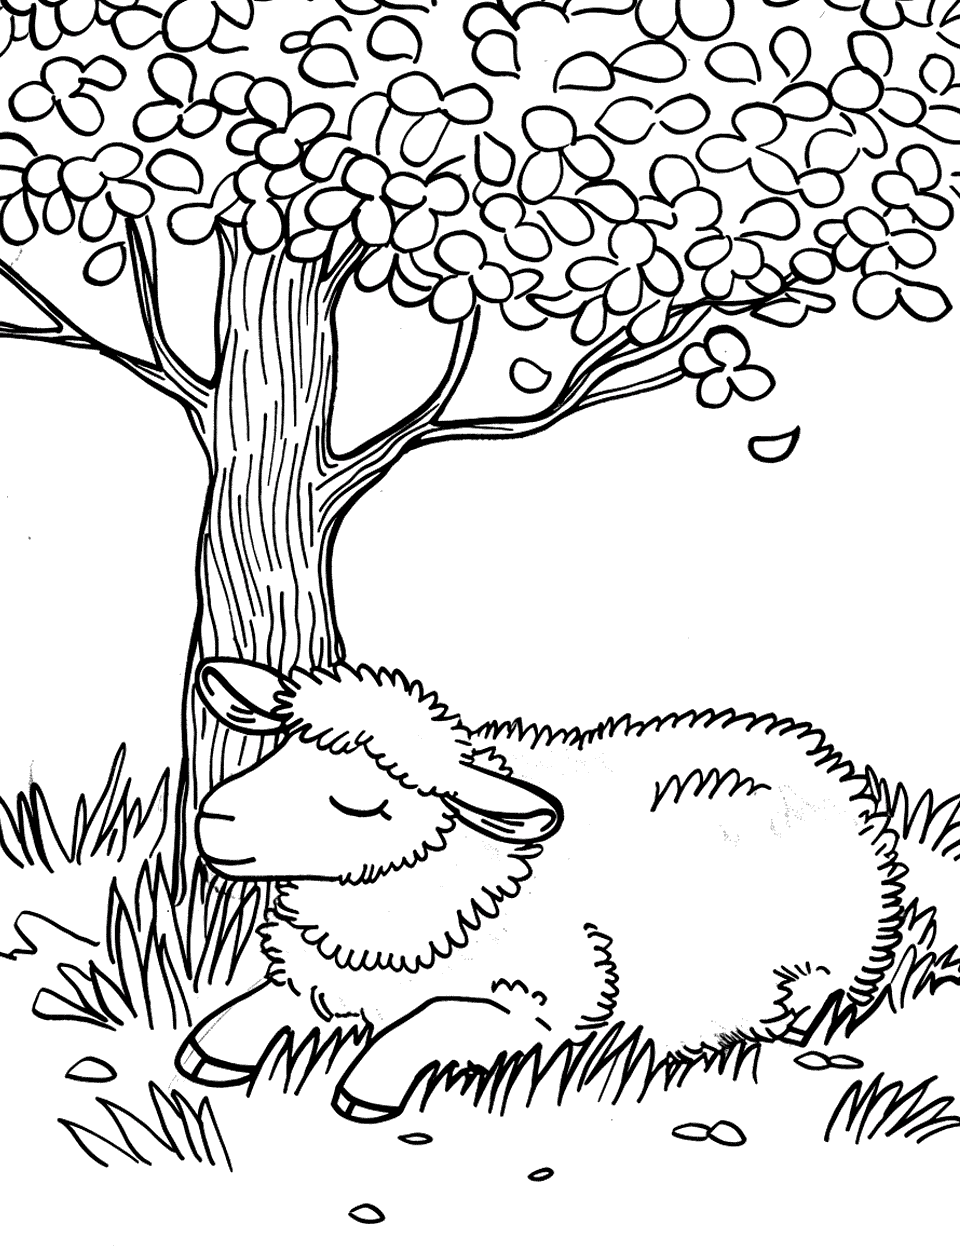 Sheep Resting Under a Tree Farm Animal Coloring Page - A fluffy sheep lying down under a leafy tree for shade.